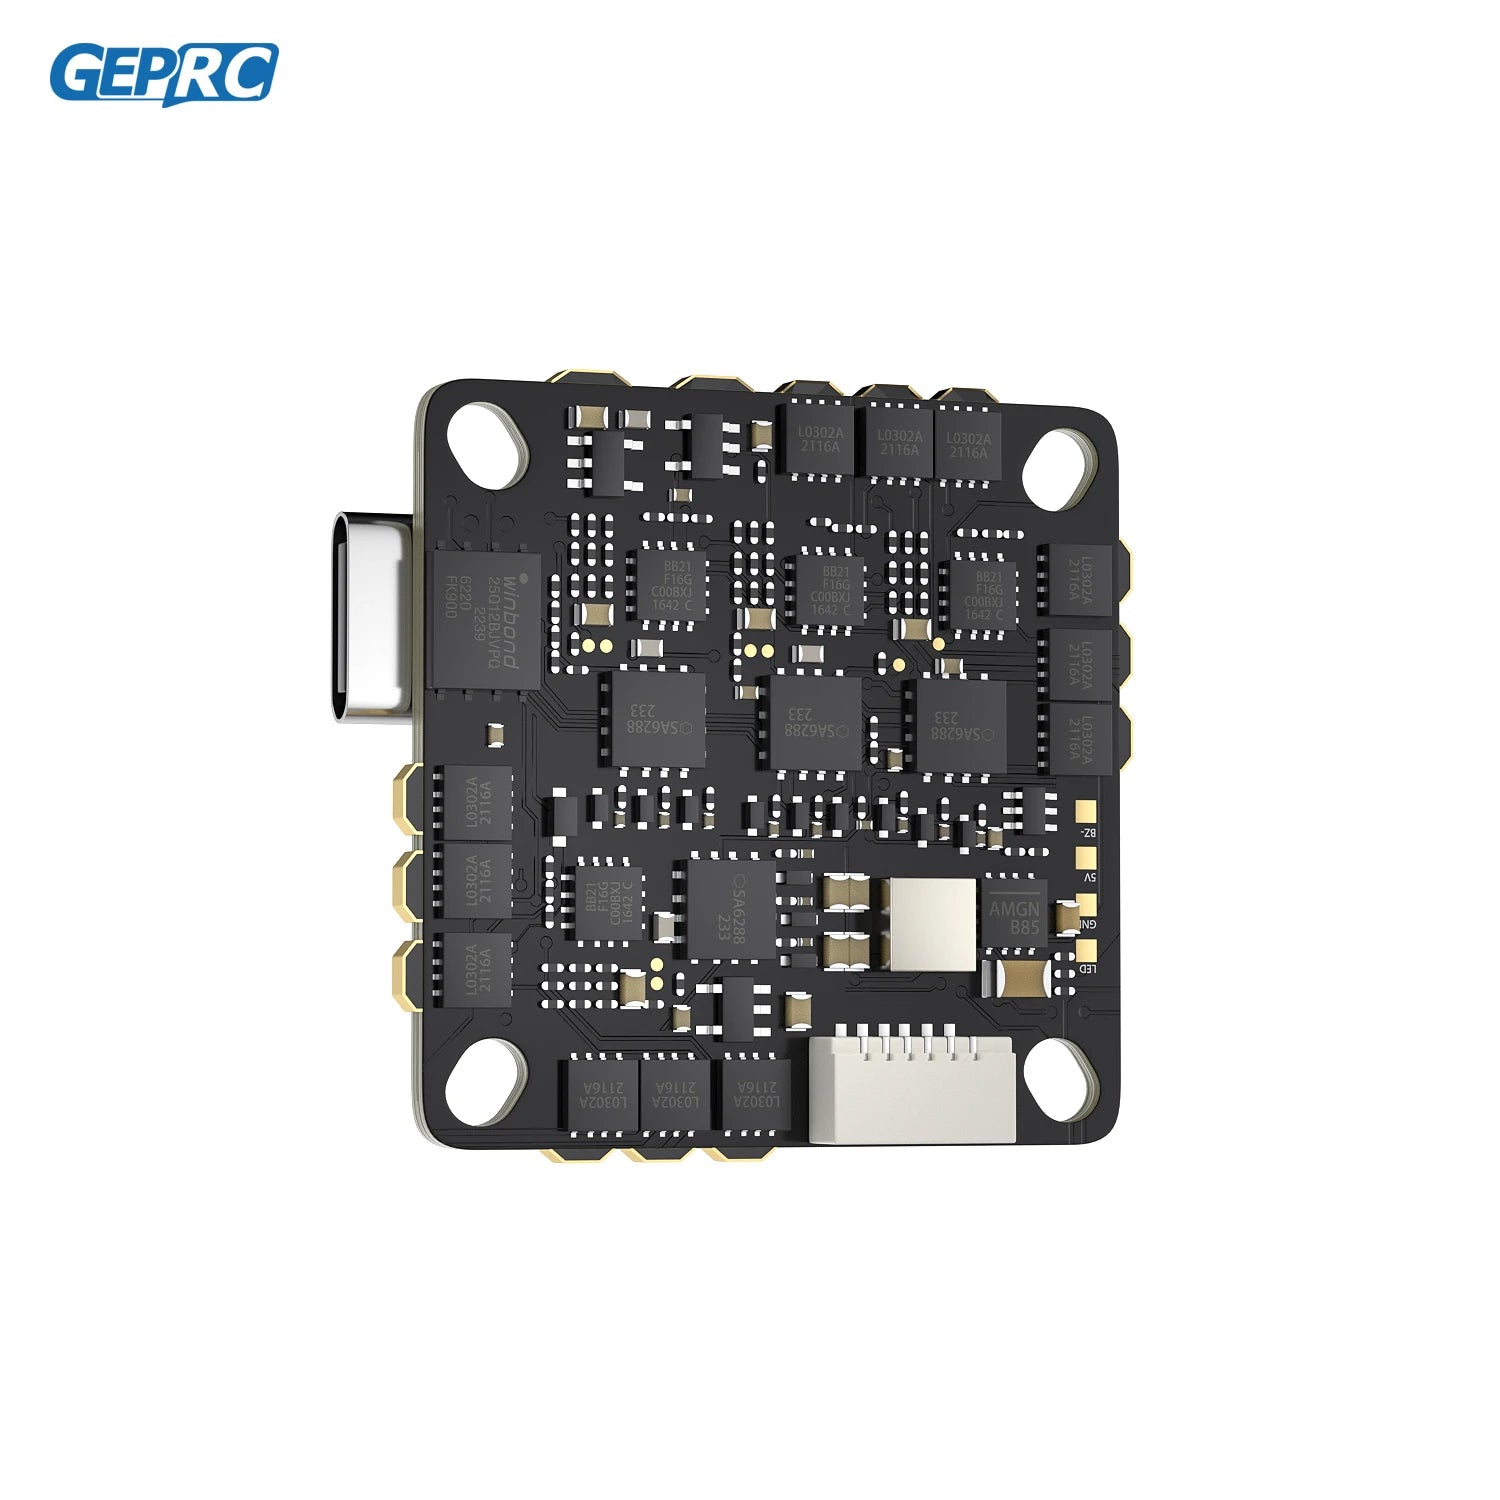 GEPRC GEP-TAKER G4 35A AIO G473 Main Control 170MHz 2~4S Transmitter Flight Control System RC FPV Racing Drone